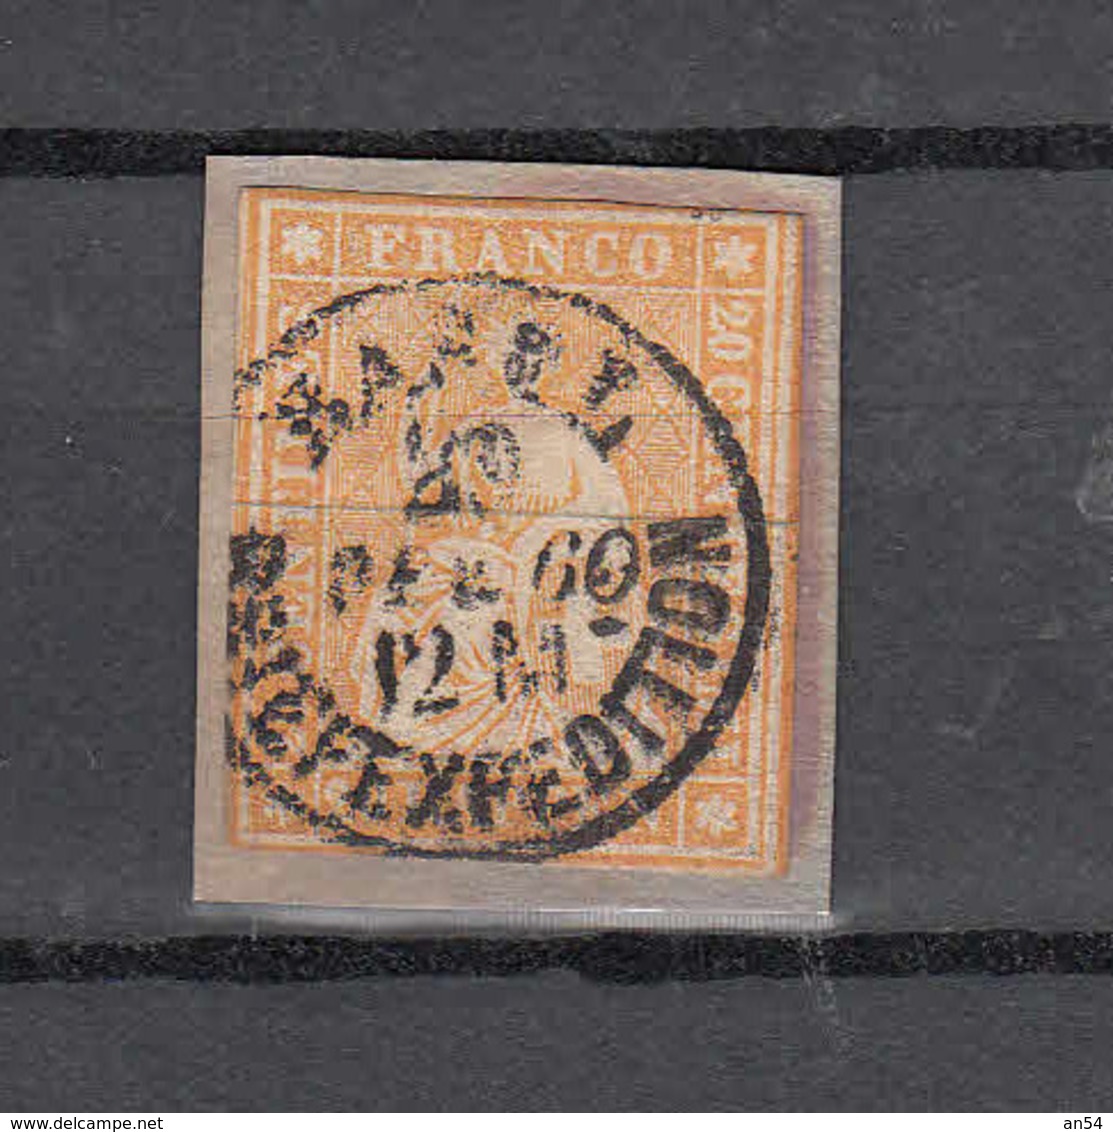 1858/62  N°25GII  OBLITERE     COTE 95.00  FRS   VENDU A 20%  19.00 FRS.     CATALOGUE ZUMSTEIN - Used Stamps